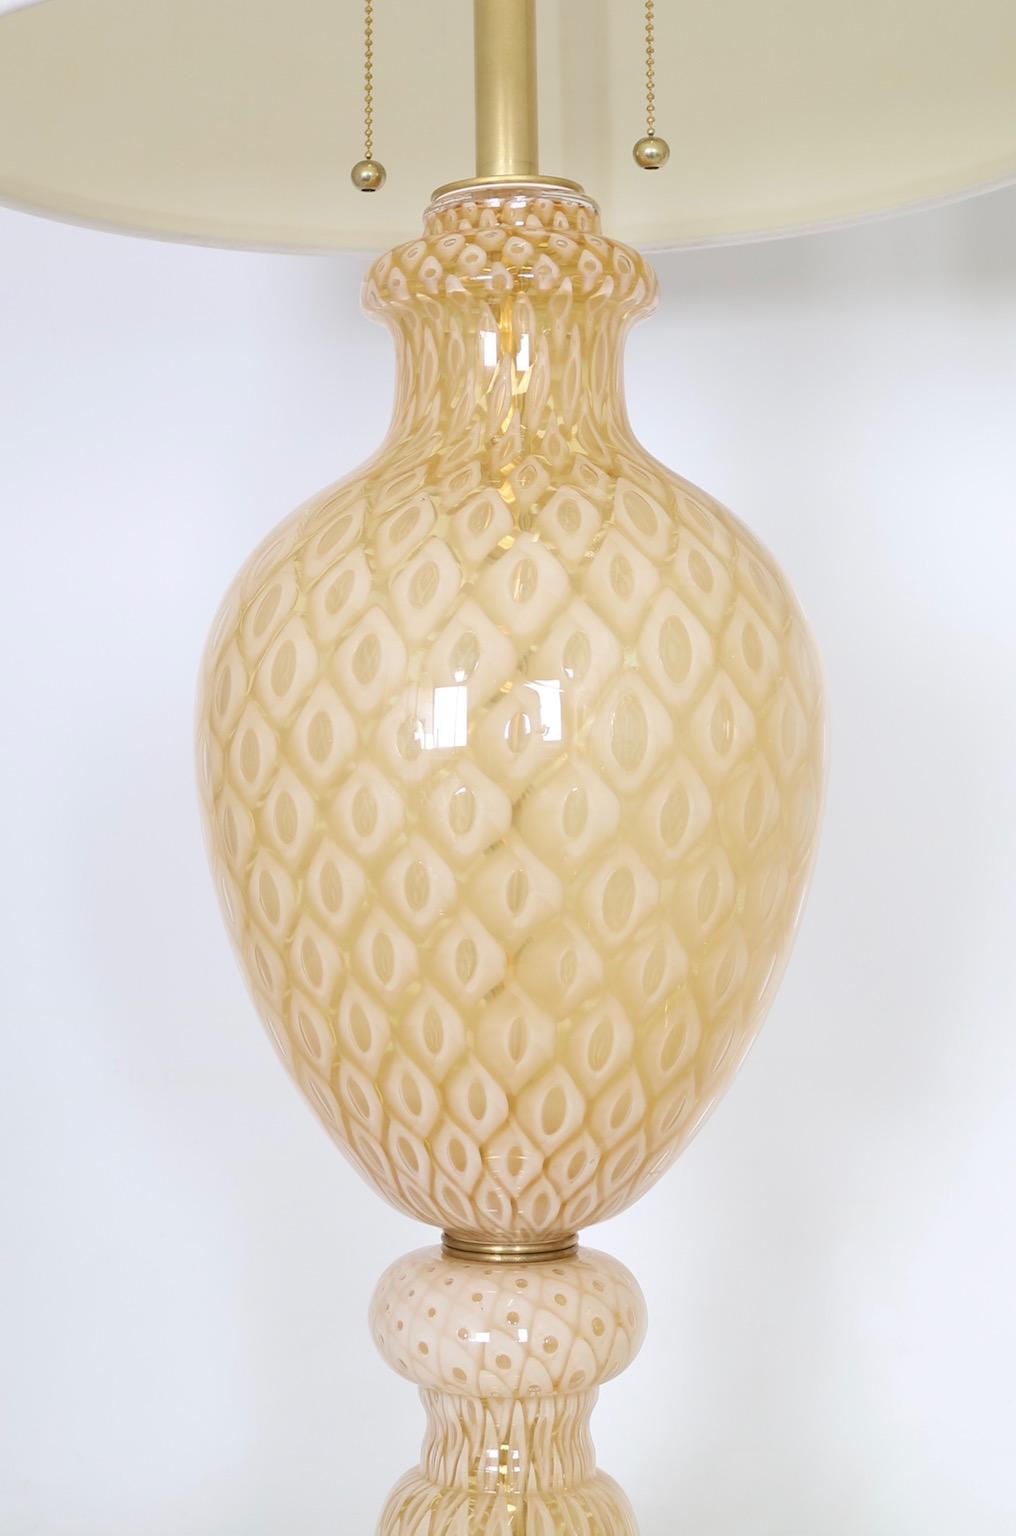 Hollywood Regency lamps by Seguso for Marbro Glass Company in gold and white Murano honeycomb glass. The lamps are bulbous in form and feature a footed glass base mounted on gilded wood. The lamps are in excellent vintage condition and are fully